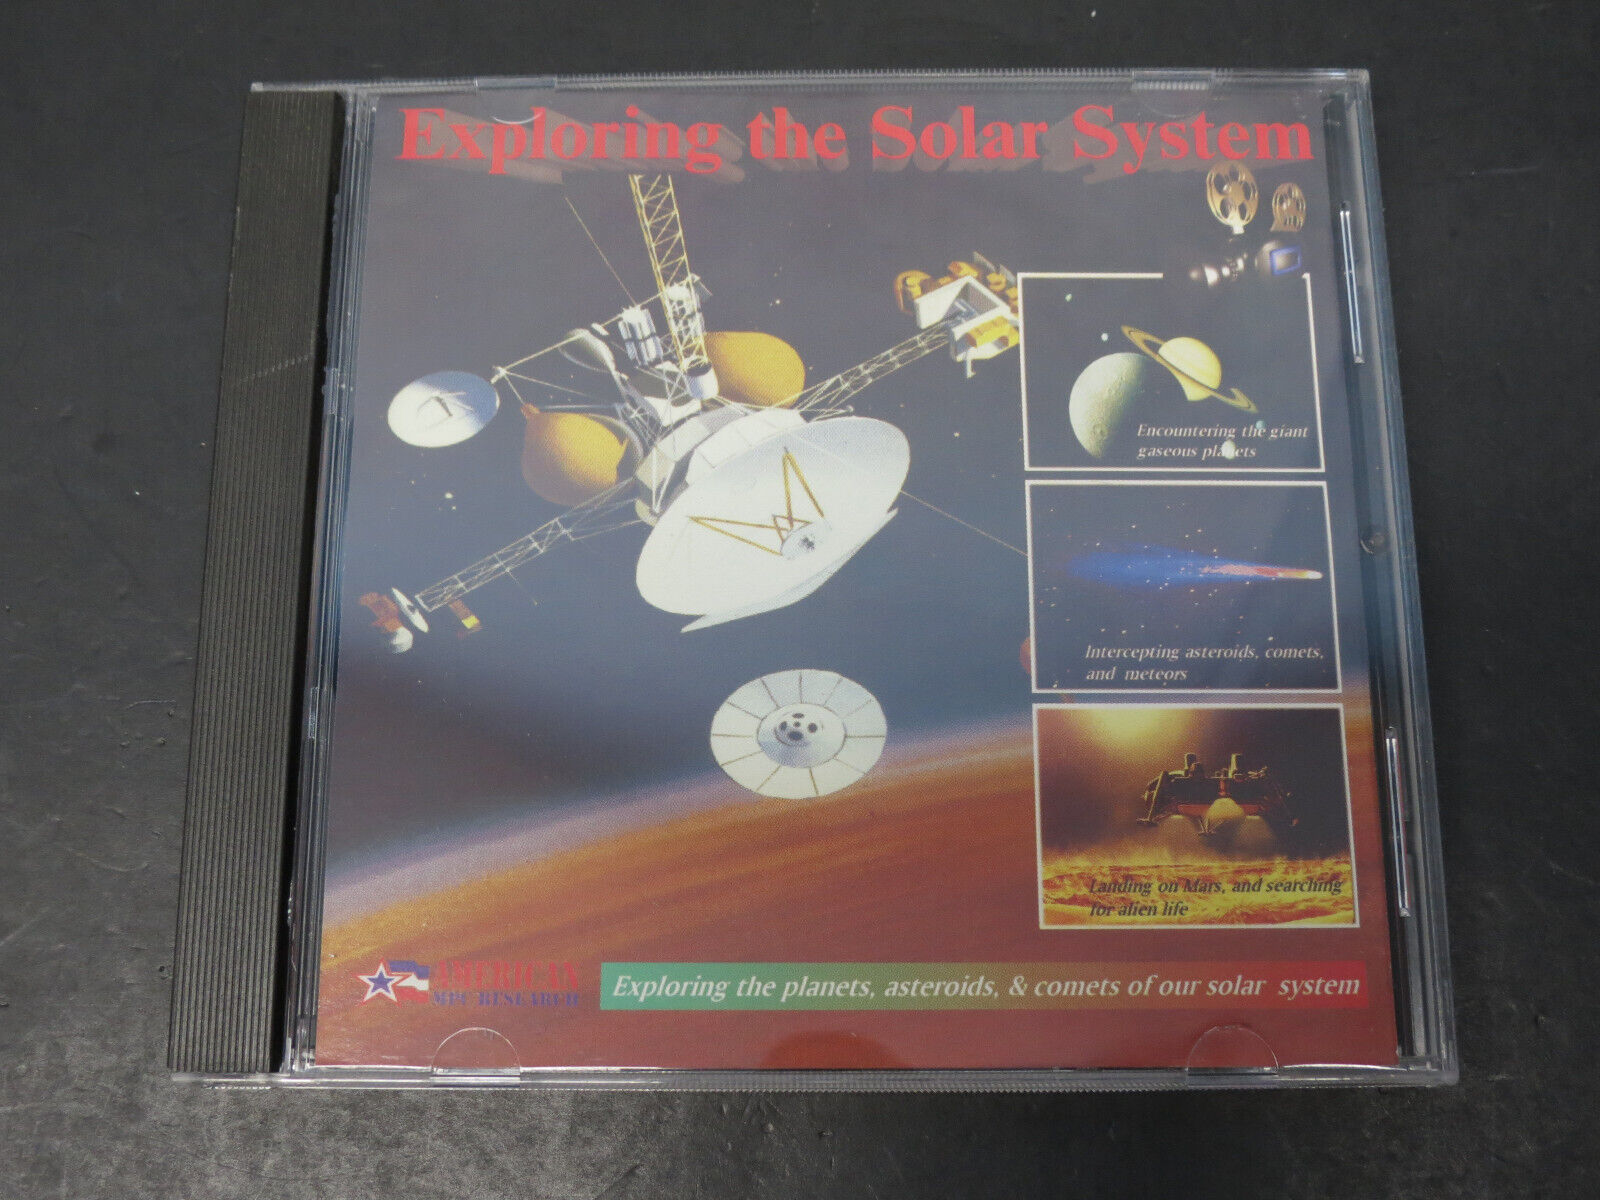 Exploring The Solar System - World Space Exploration EB-10102 - CD-Rom Win 95